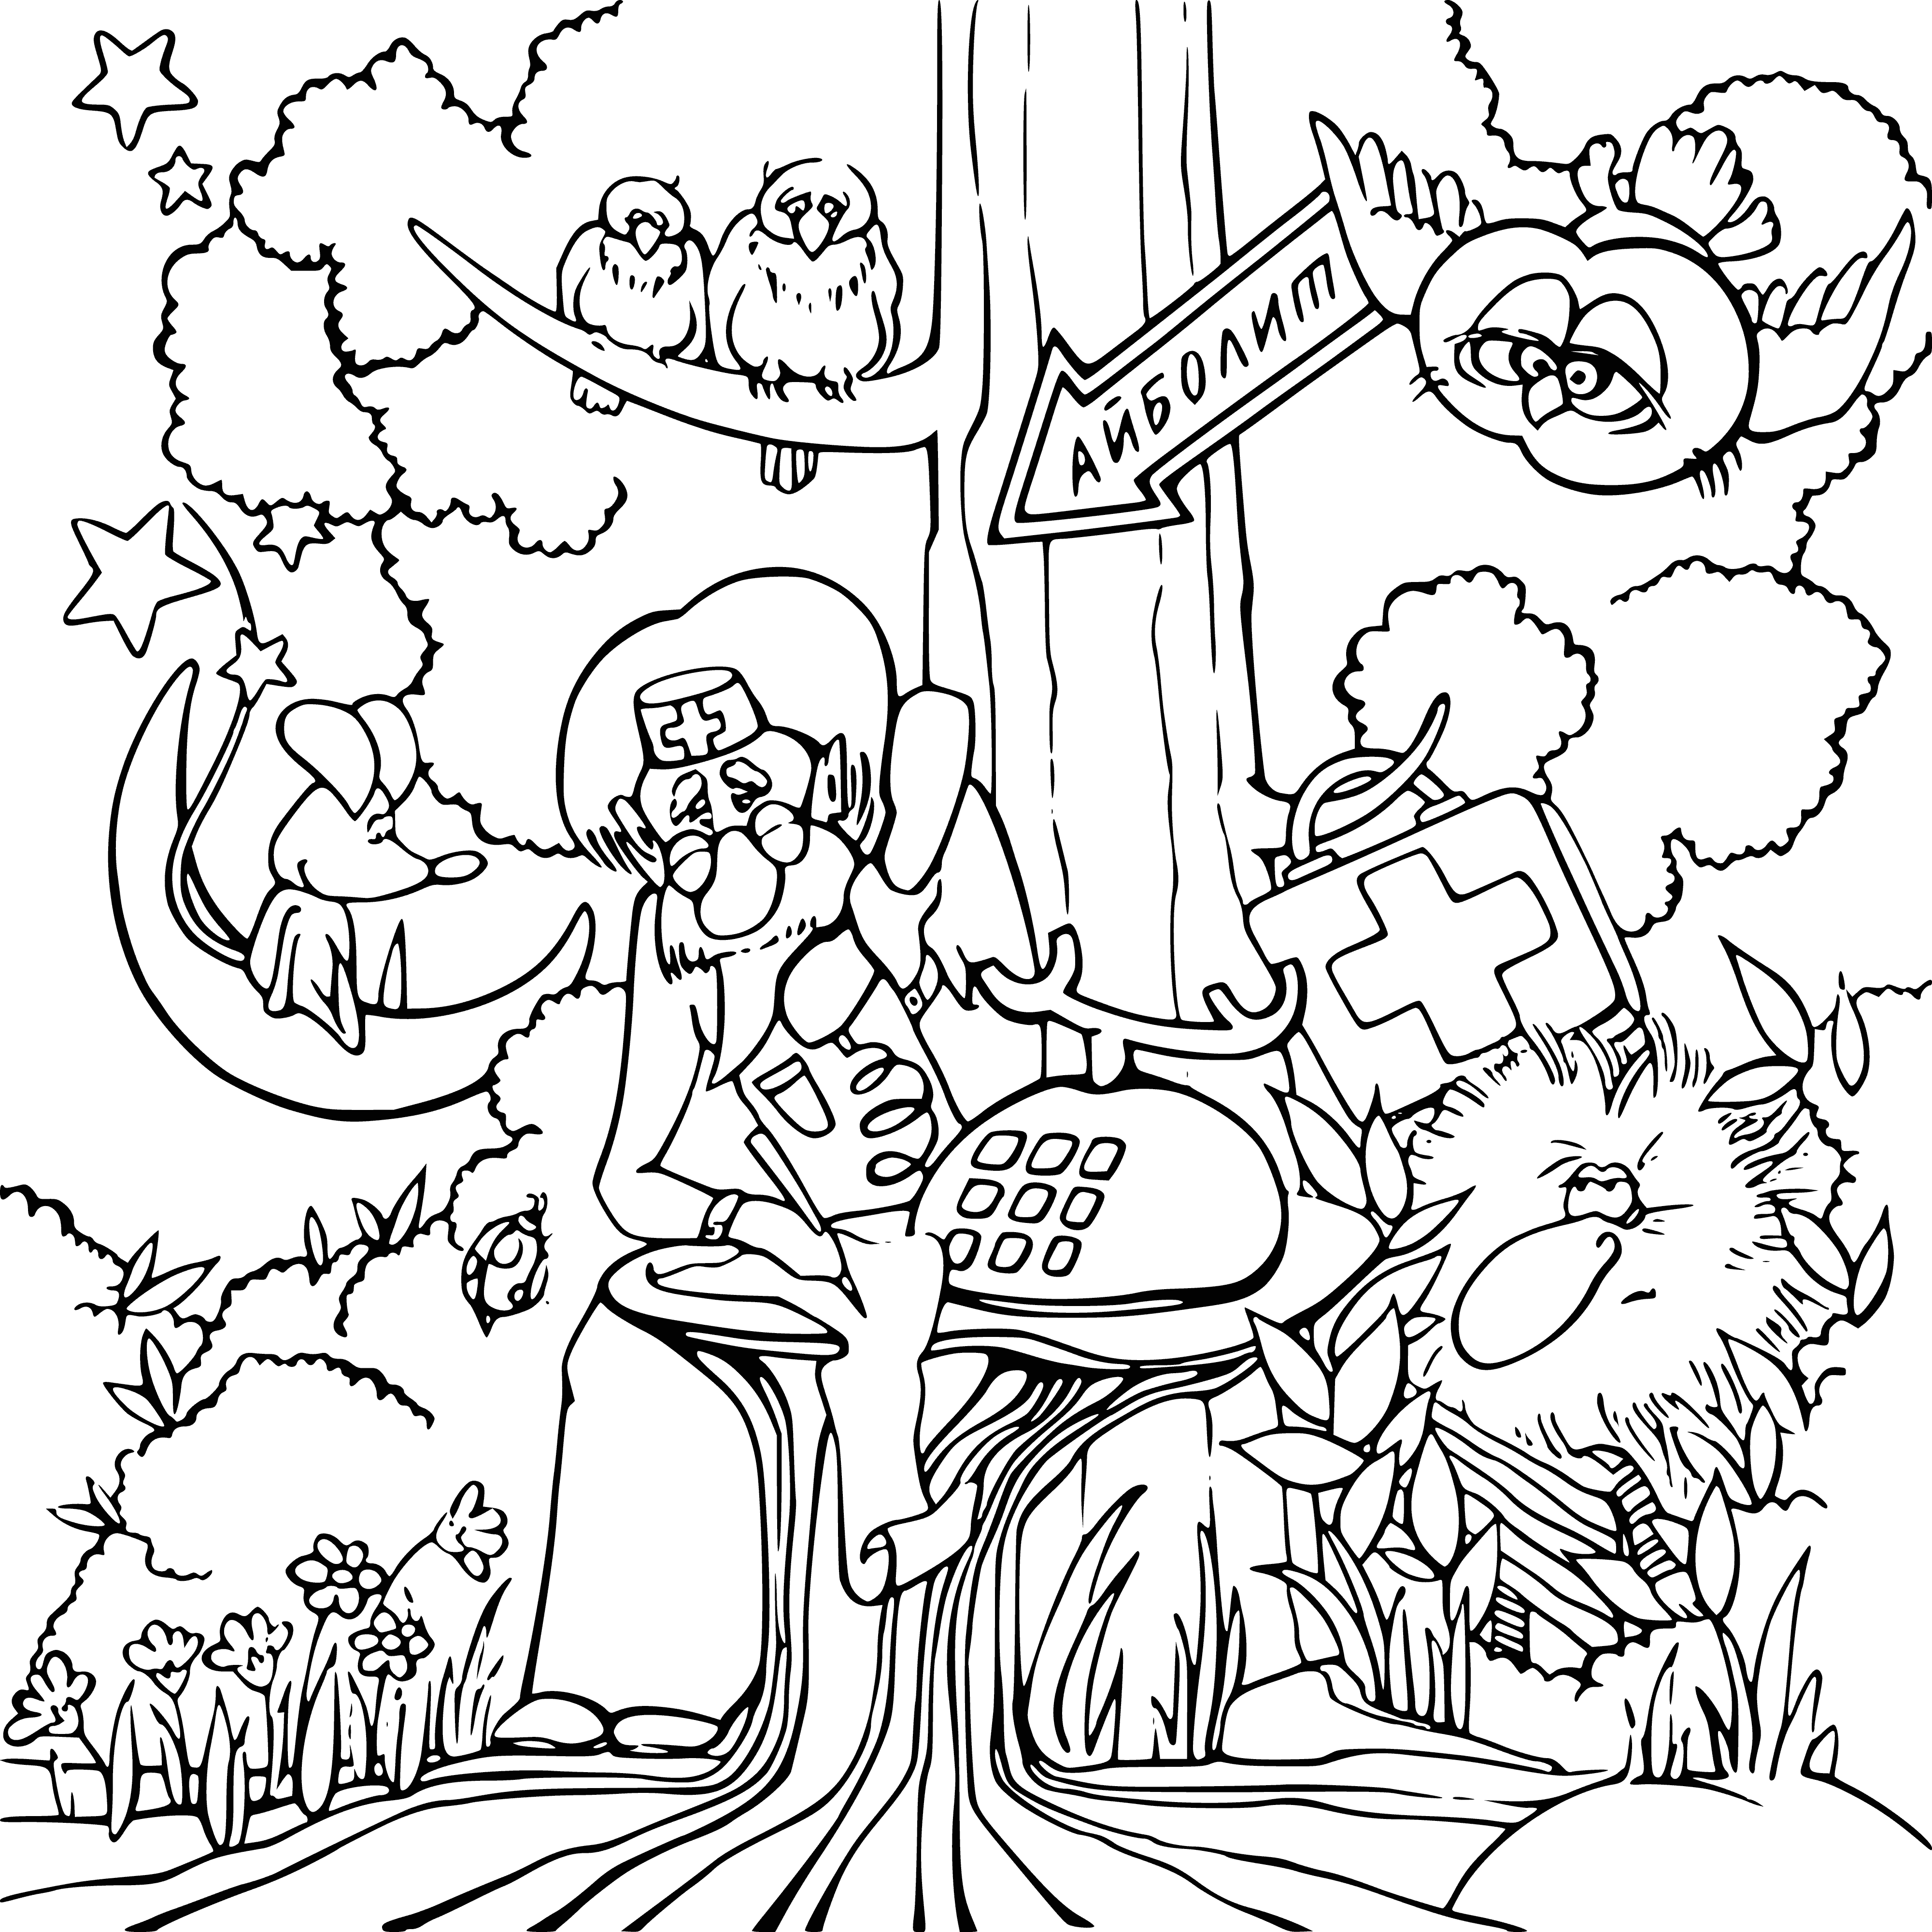 coloring page: Doctor kindly examines head of young boy, no pain seems to be present.